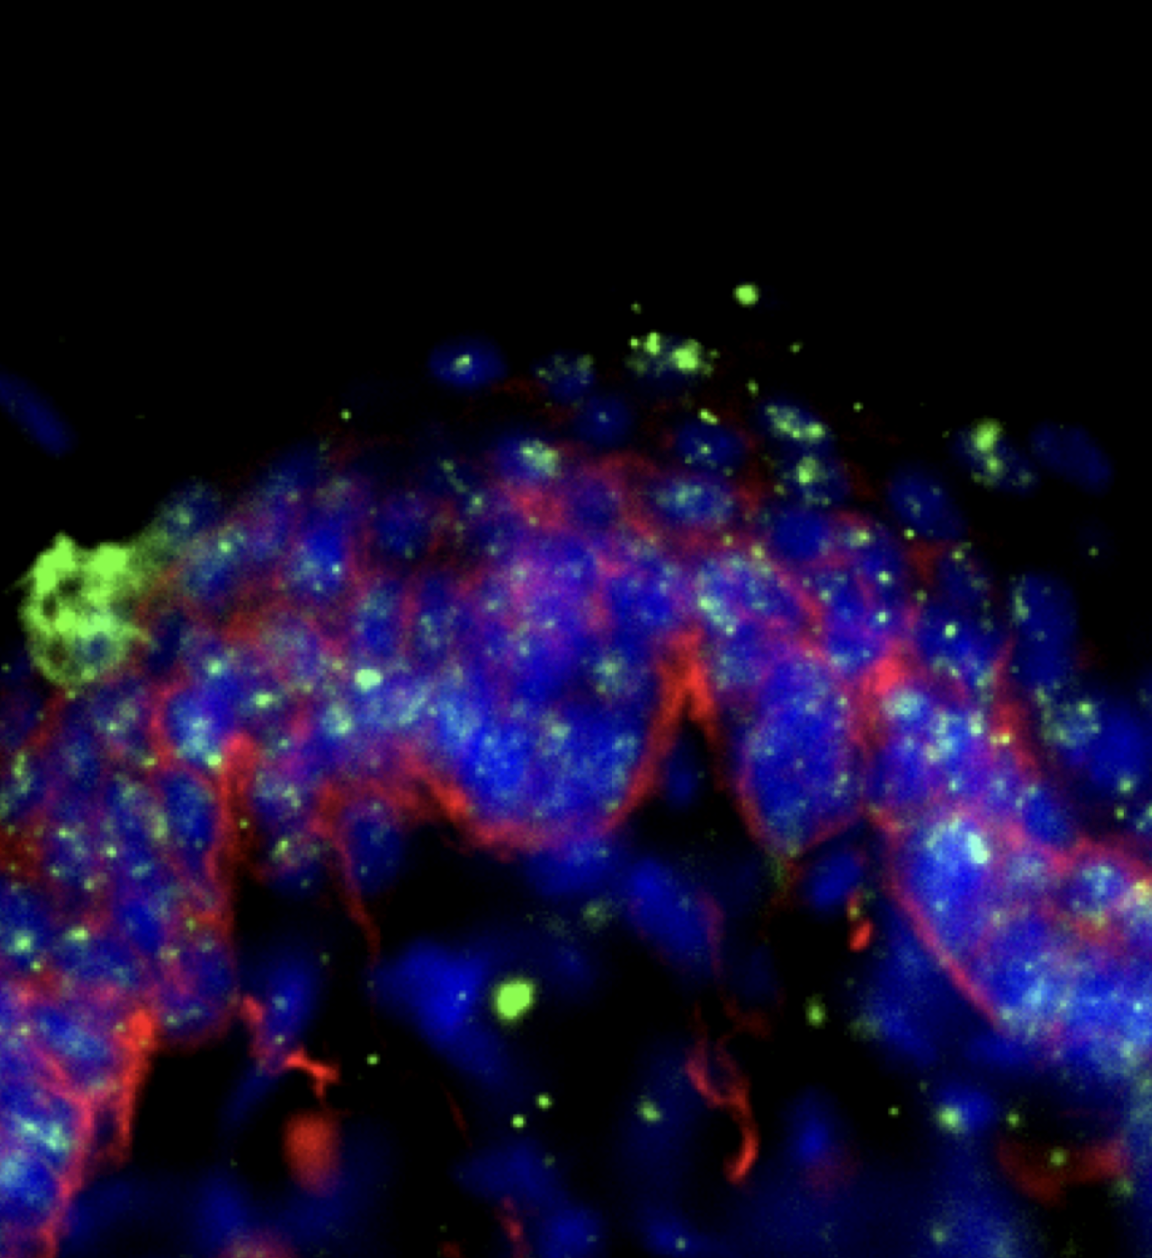 neurons innervating between skin cells shown in bright, fluorescent colors